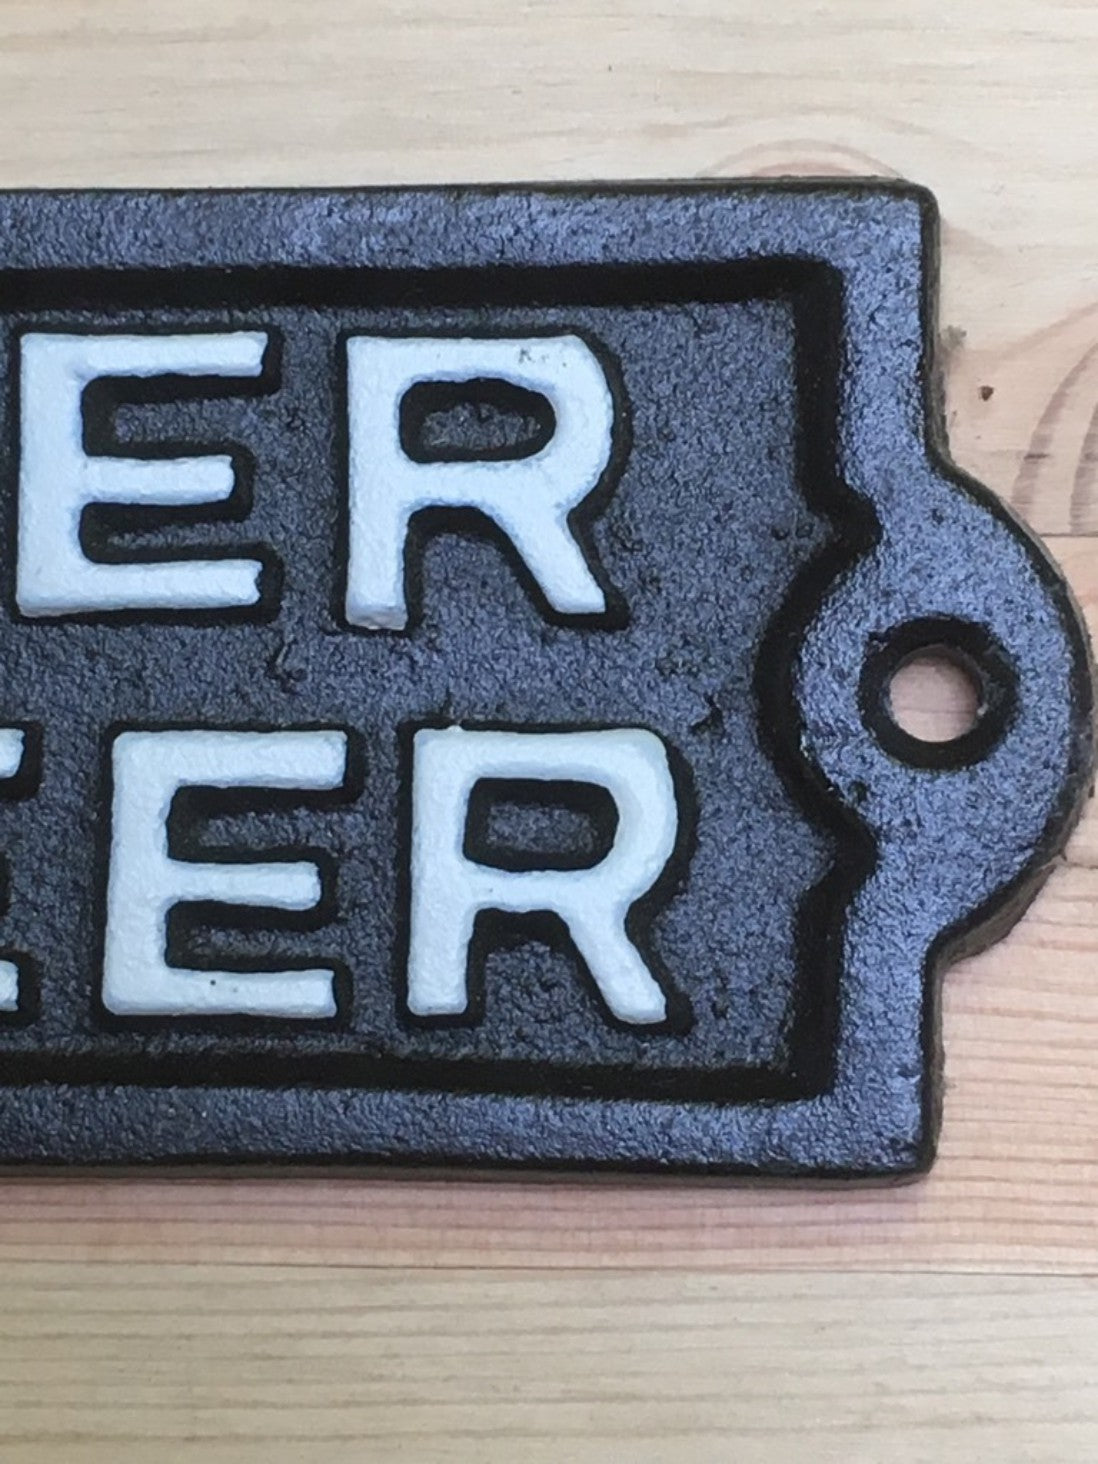 Cast Iron Wall Sign "SAVE WATER DRINK BEER" Black With White Text